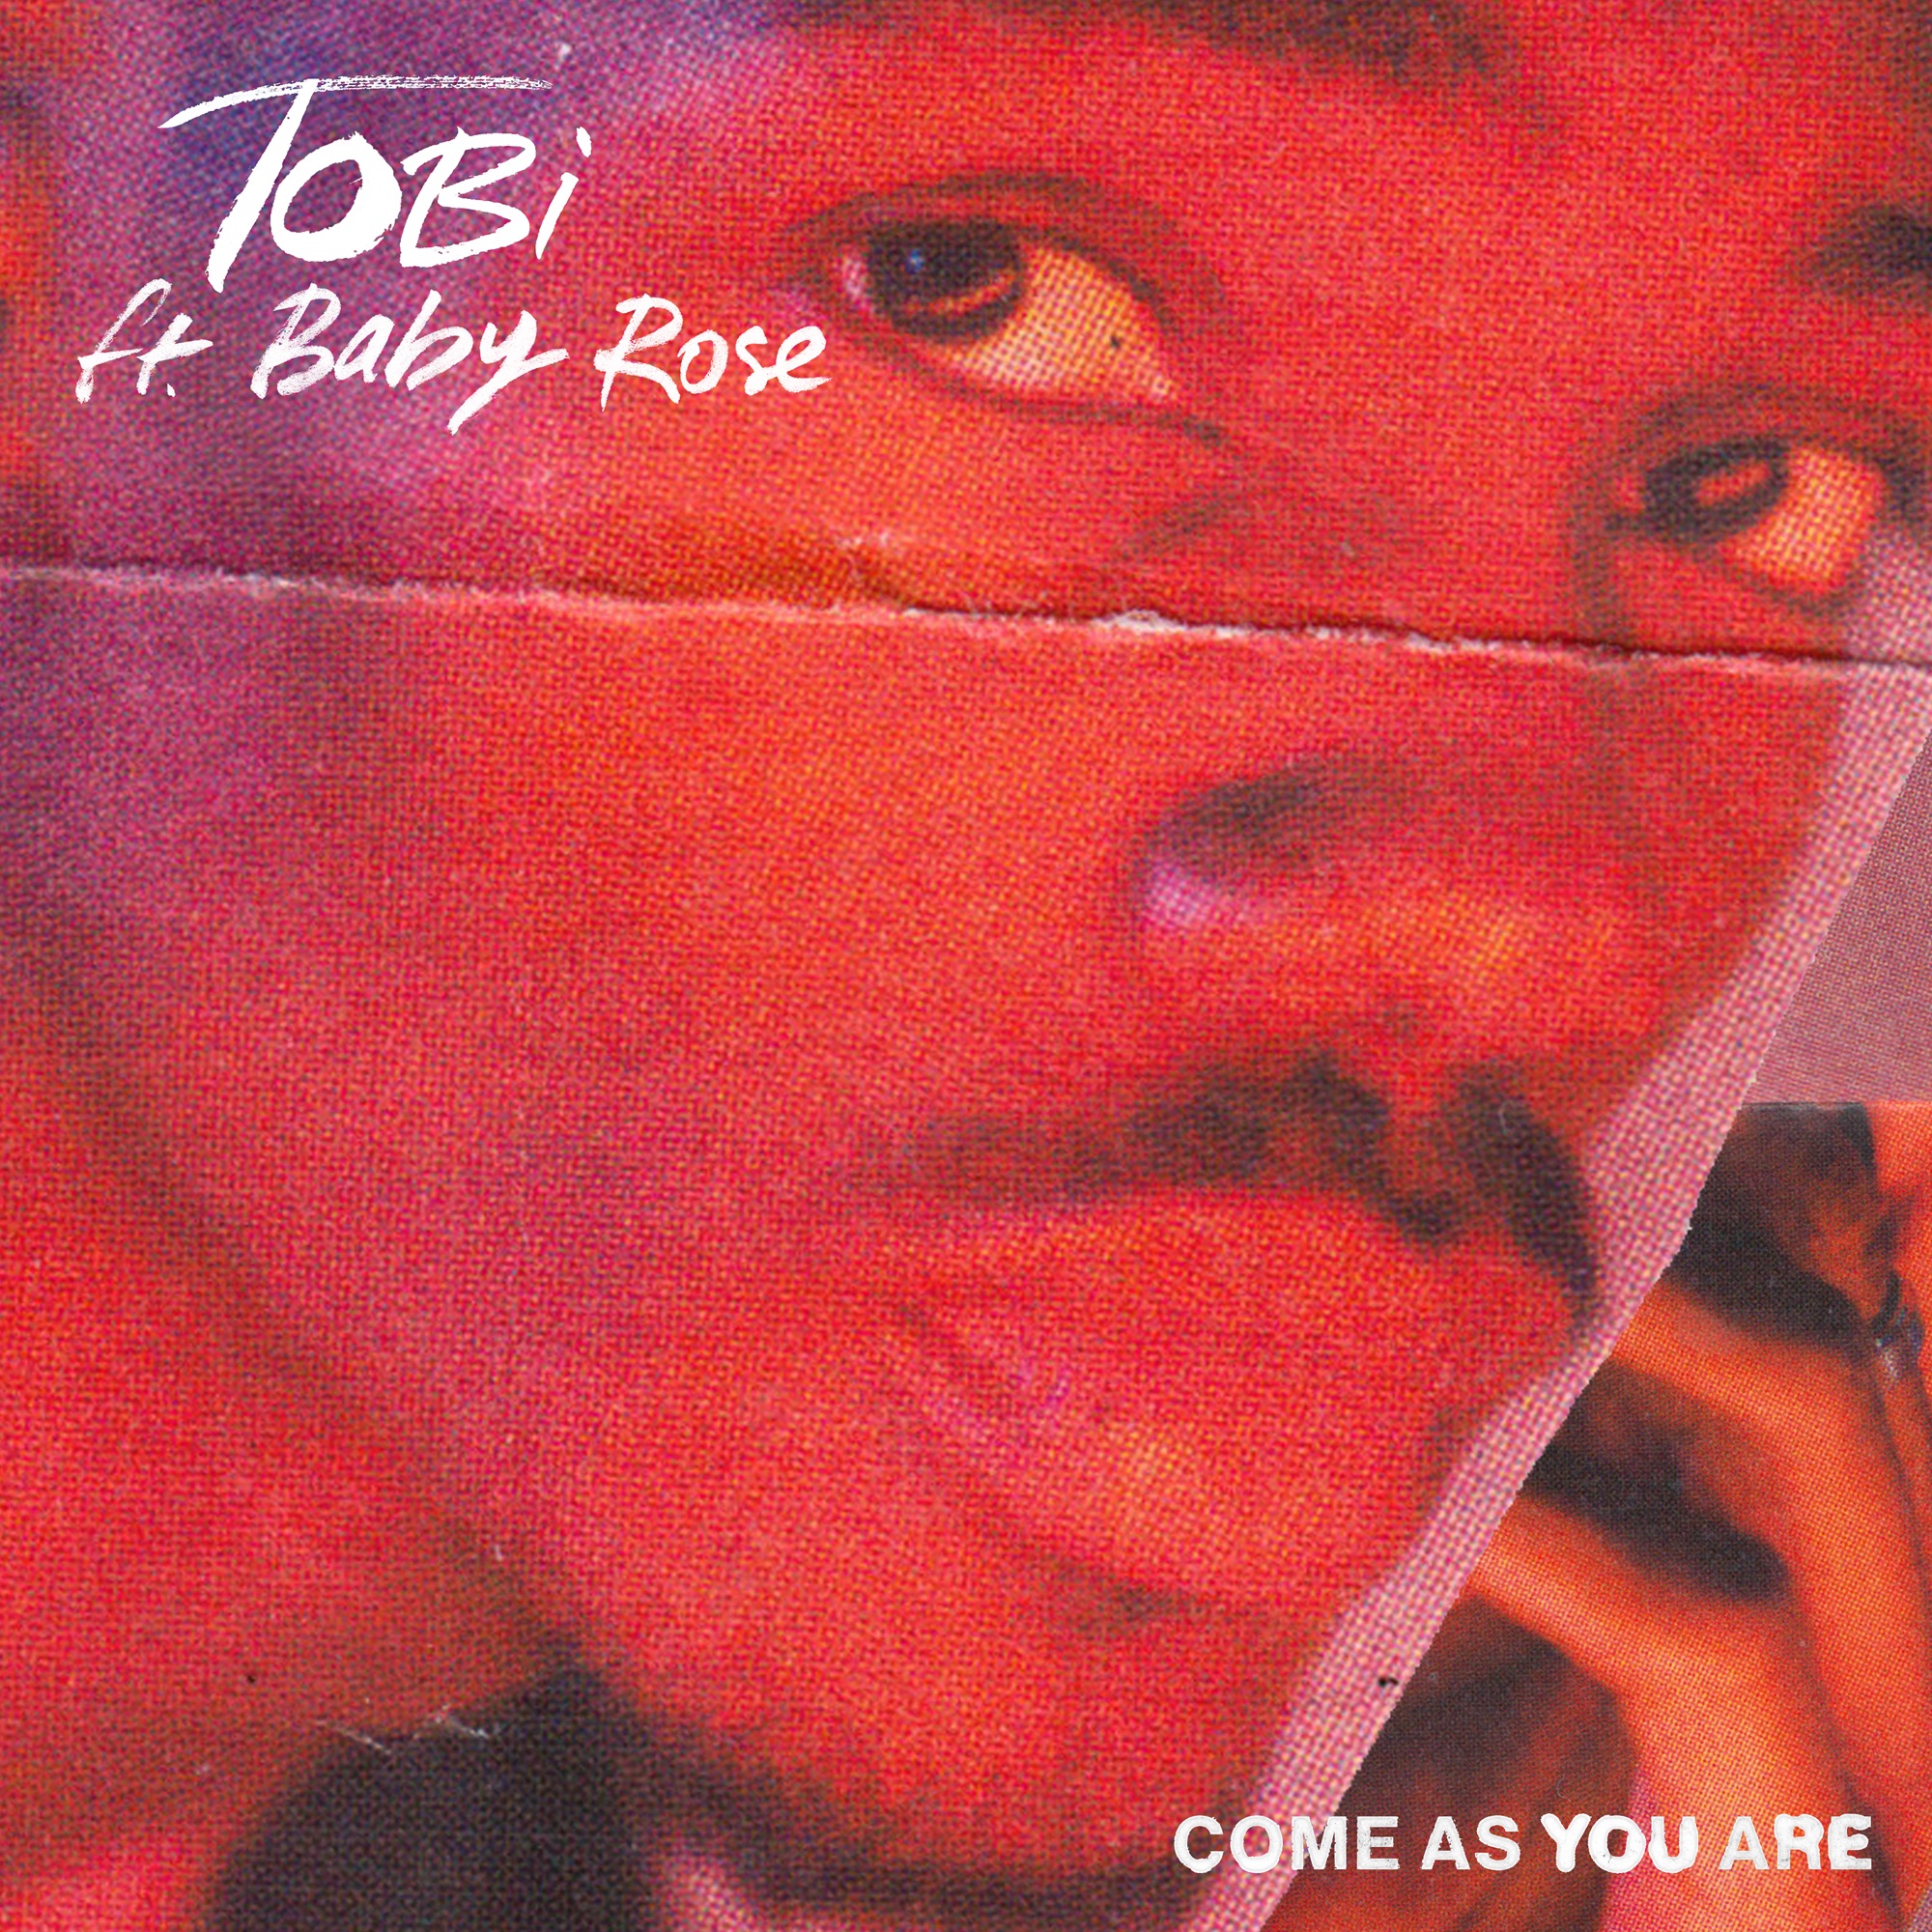 TOBi & Baby Rose - Come As You Are - Single